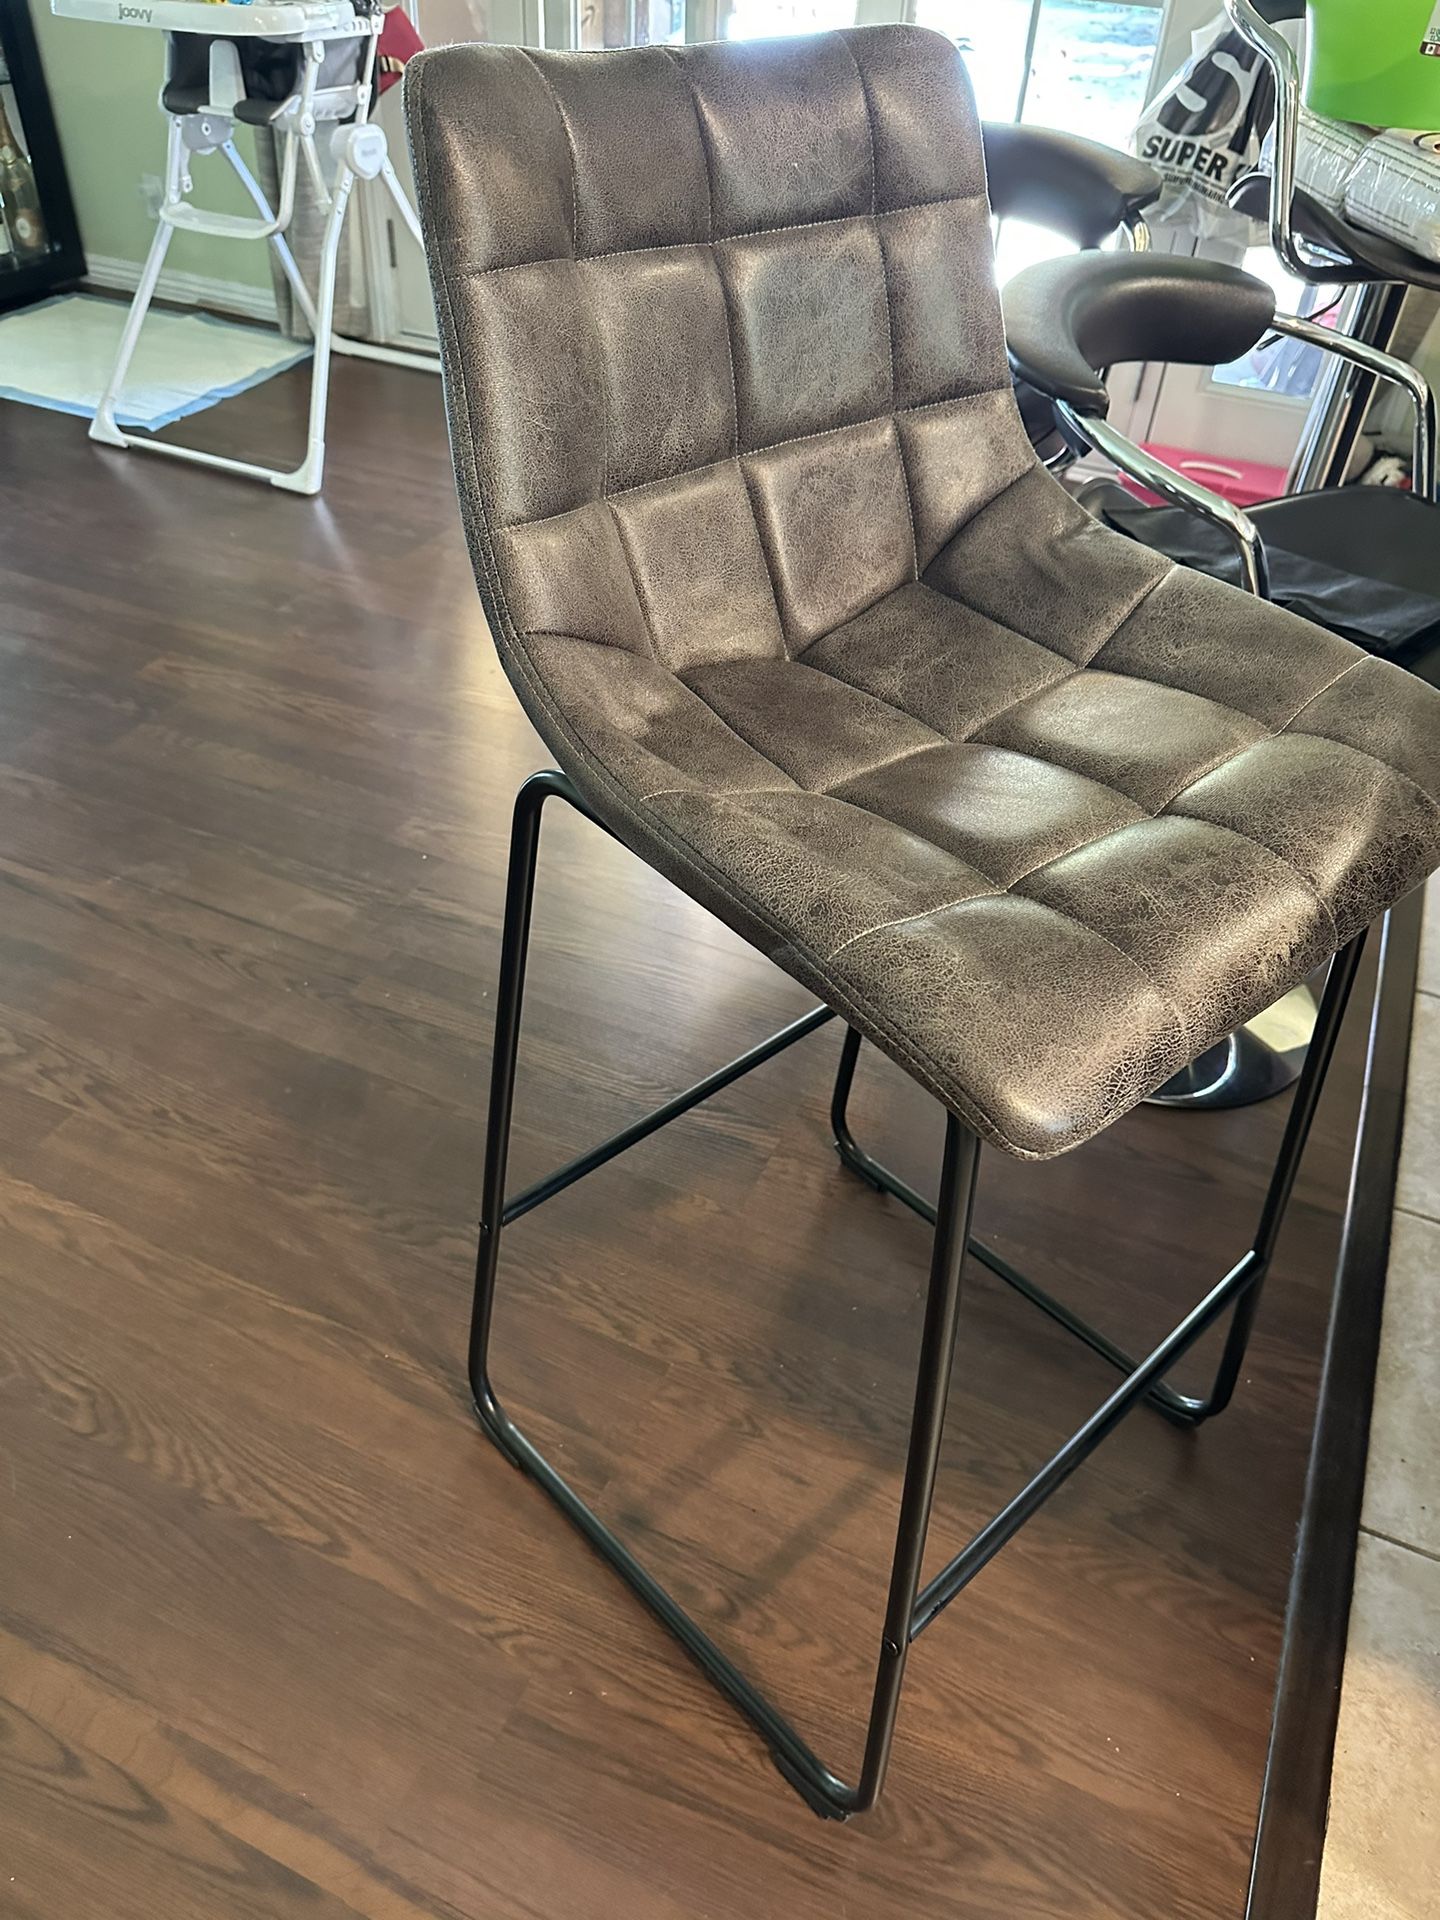 Bar Chairs,$70 For Both 